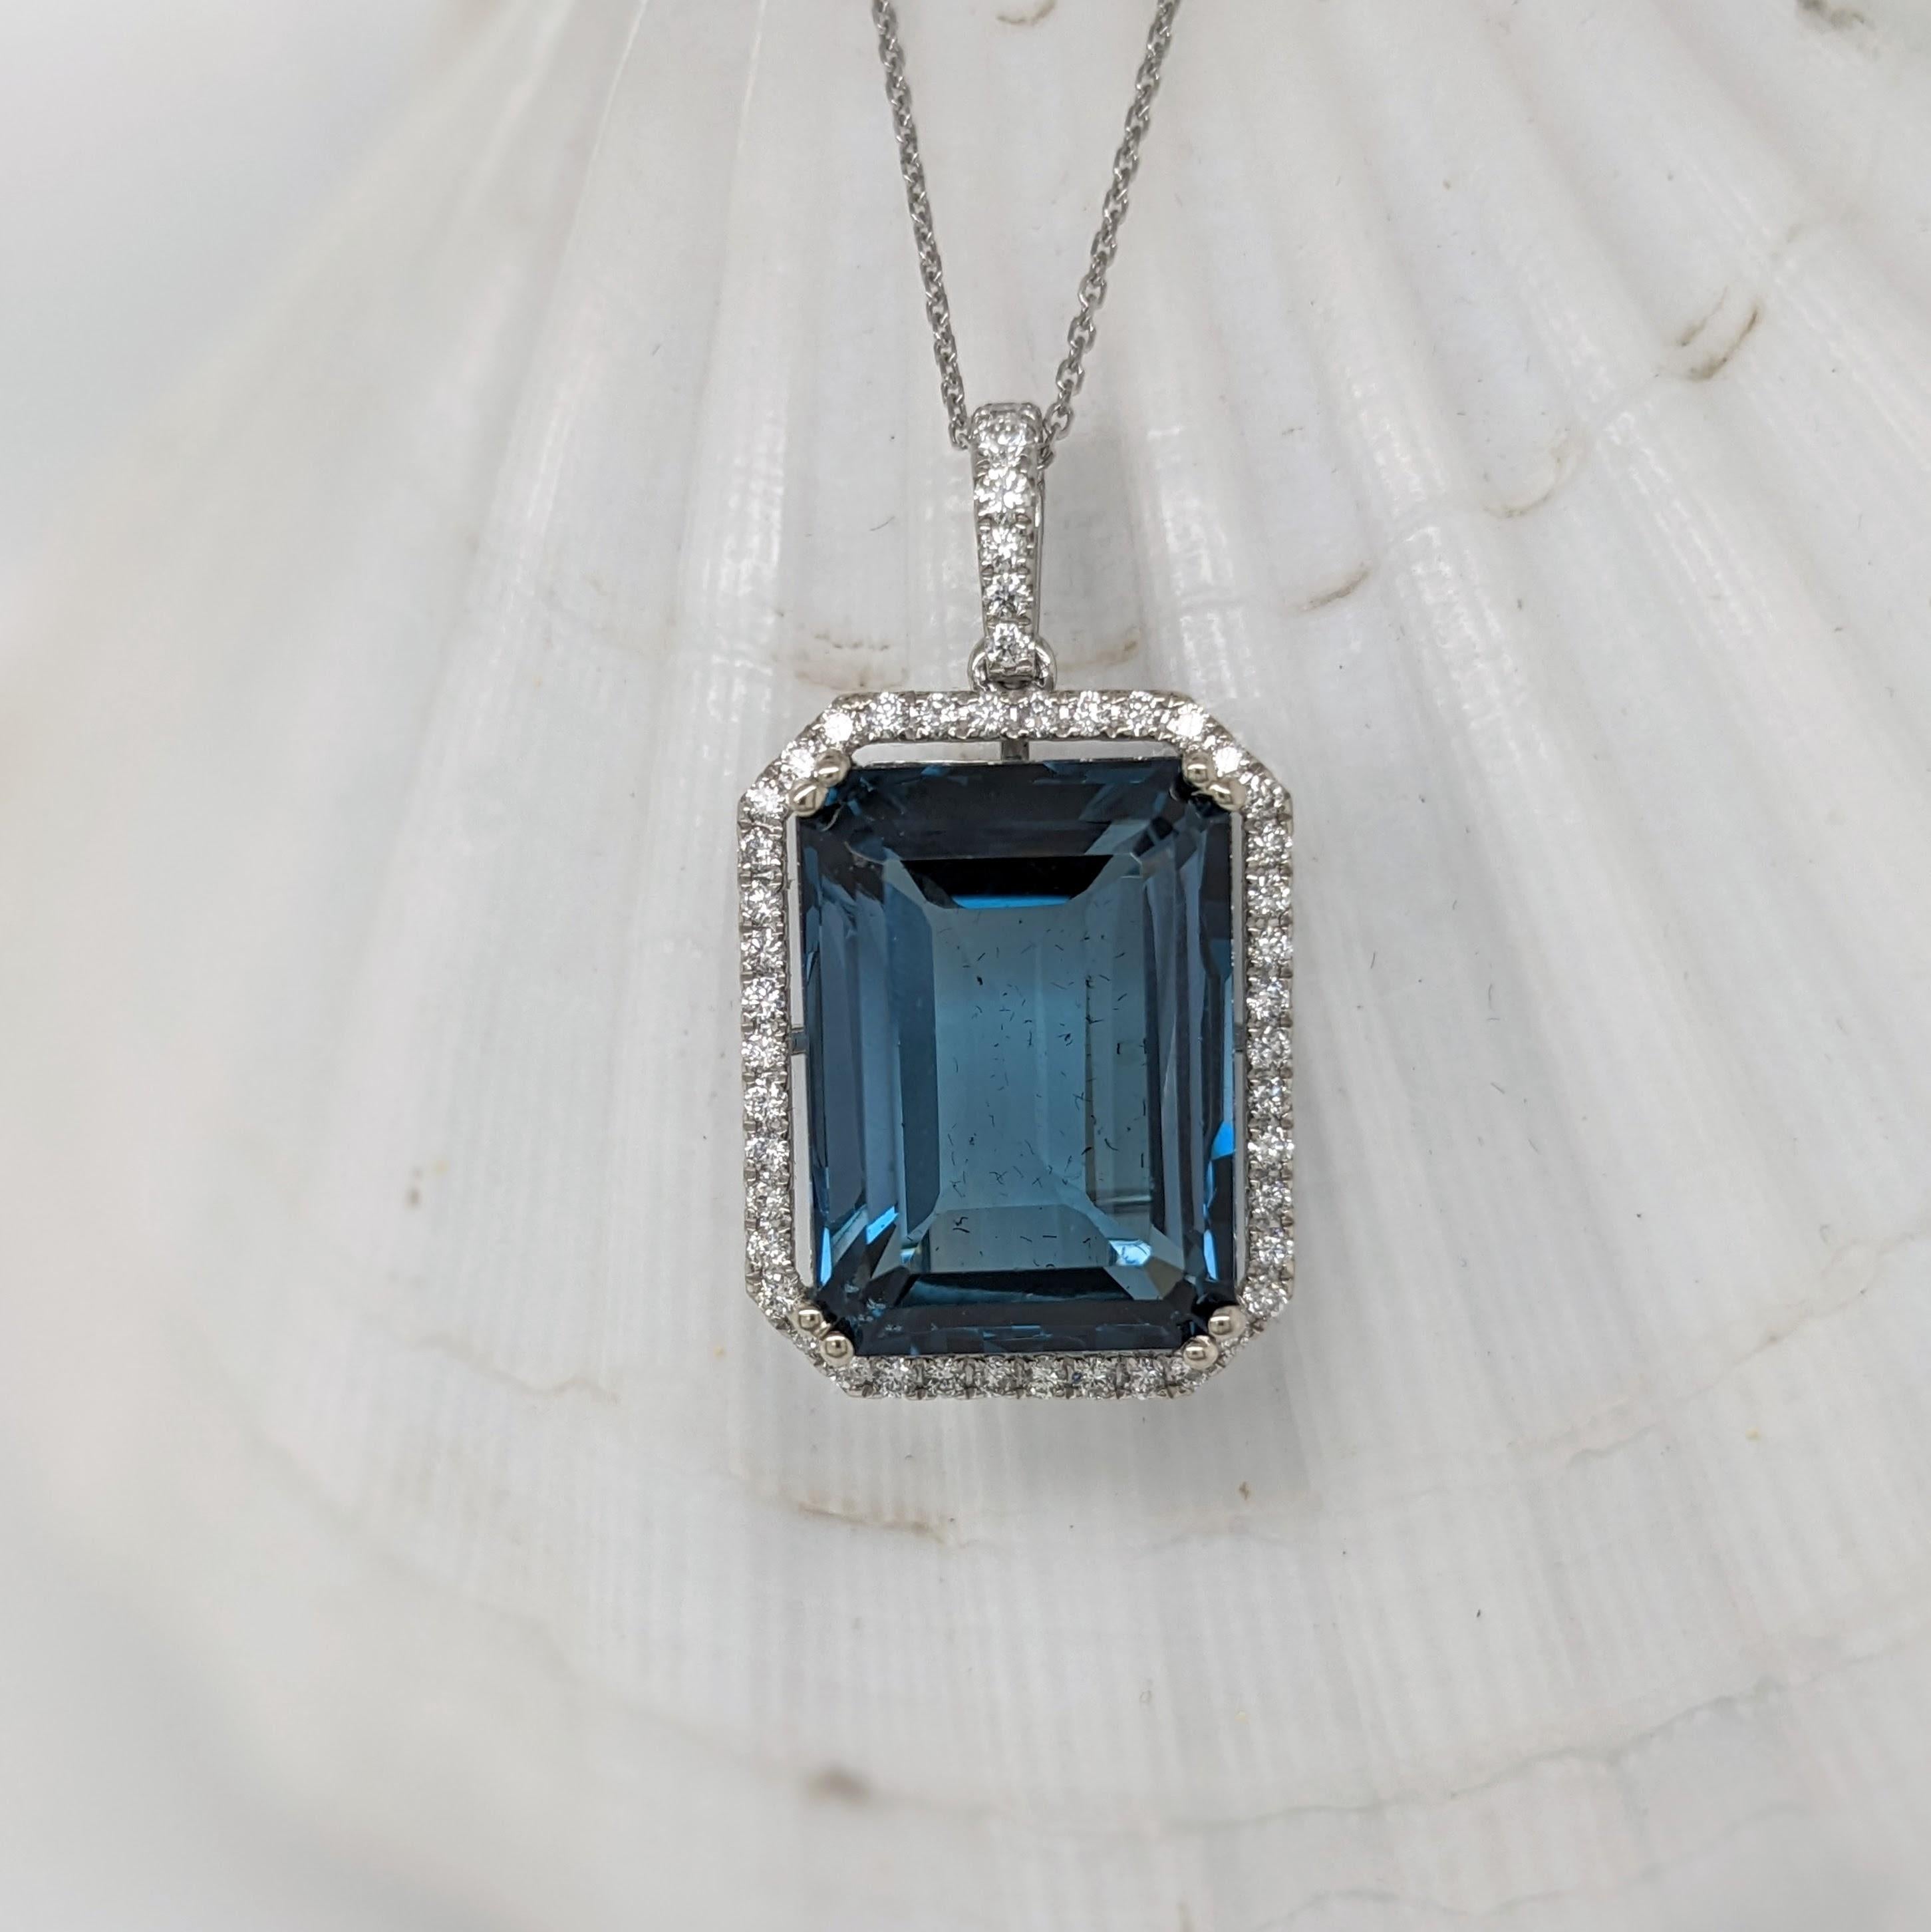 This beautiful statement pendant features a 21.41 carat emerald cut london topaz gemstone with a halo of natural earth mined diamonds and diamond studded bail, all set in solid 14K gold. This pendant can be a lovely November birthstone gift for your